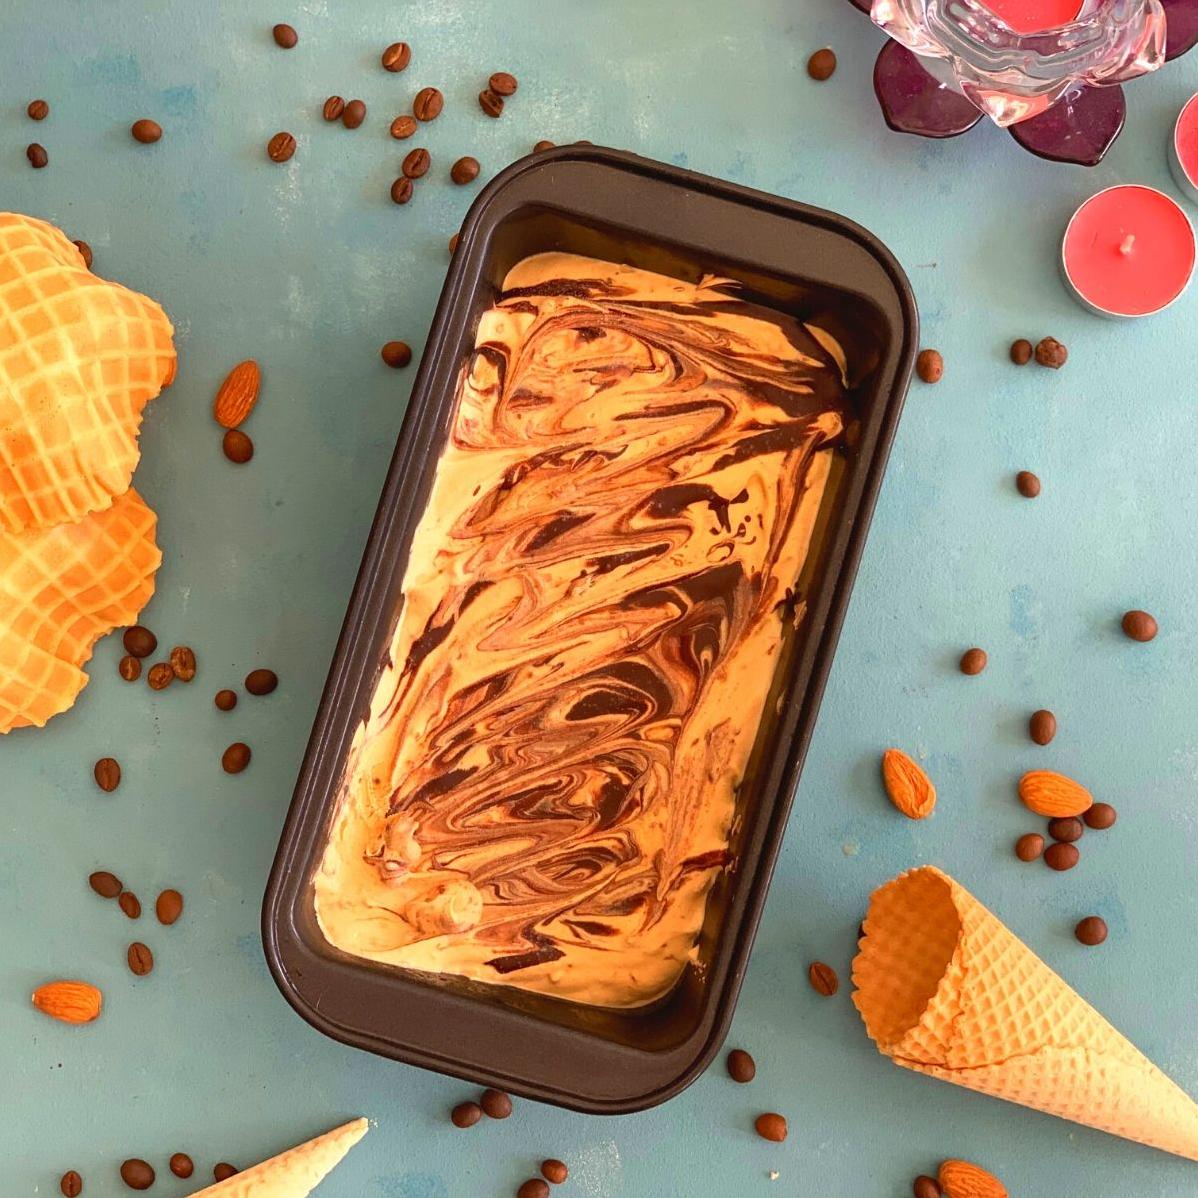  This ice cream recipe is perfect for coffee lovers who want a twist on traditional flavors.